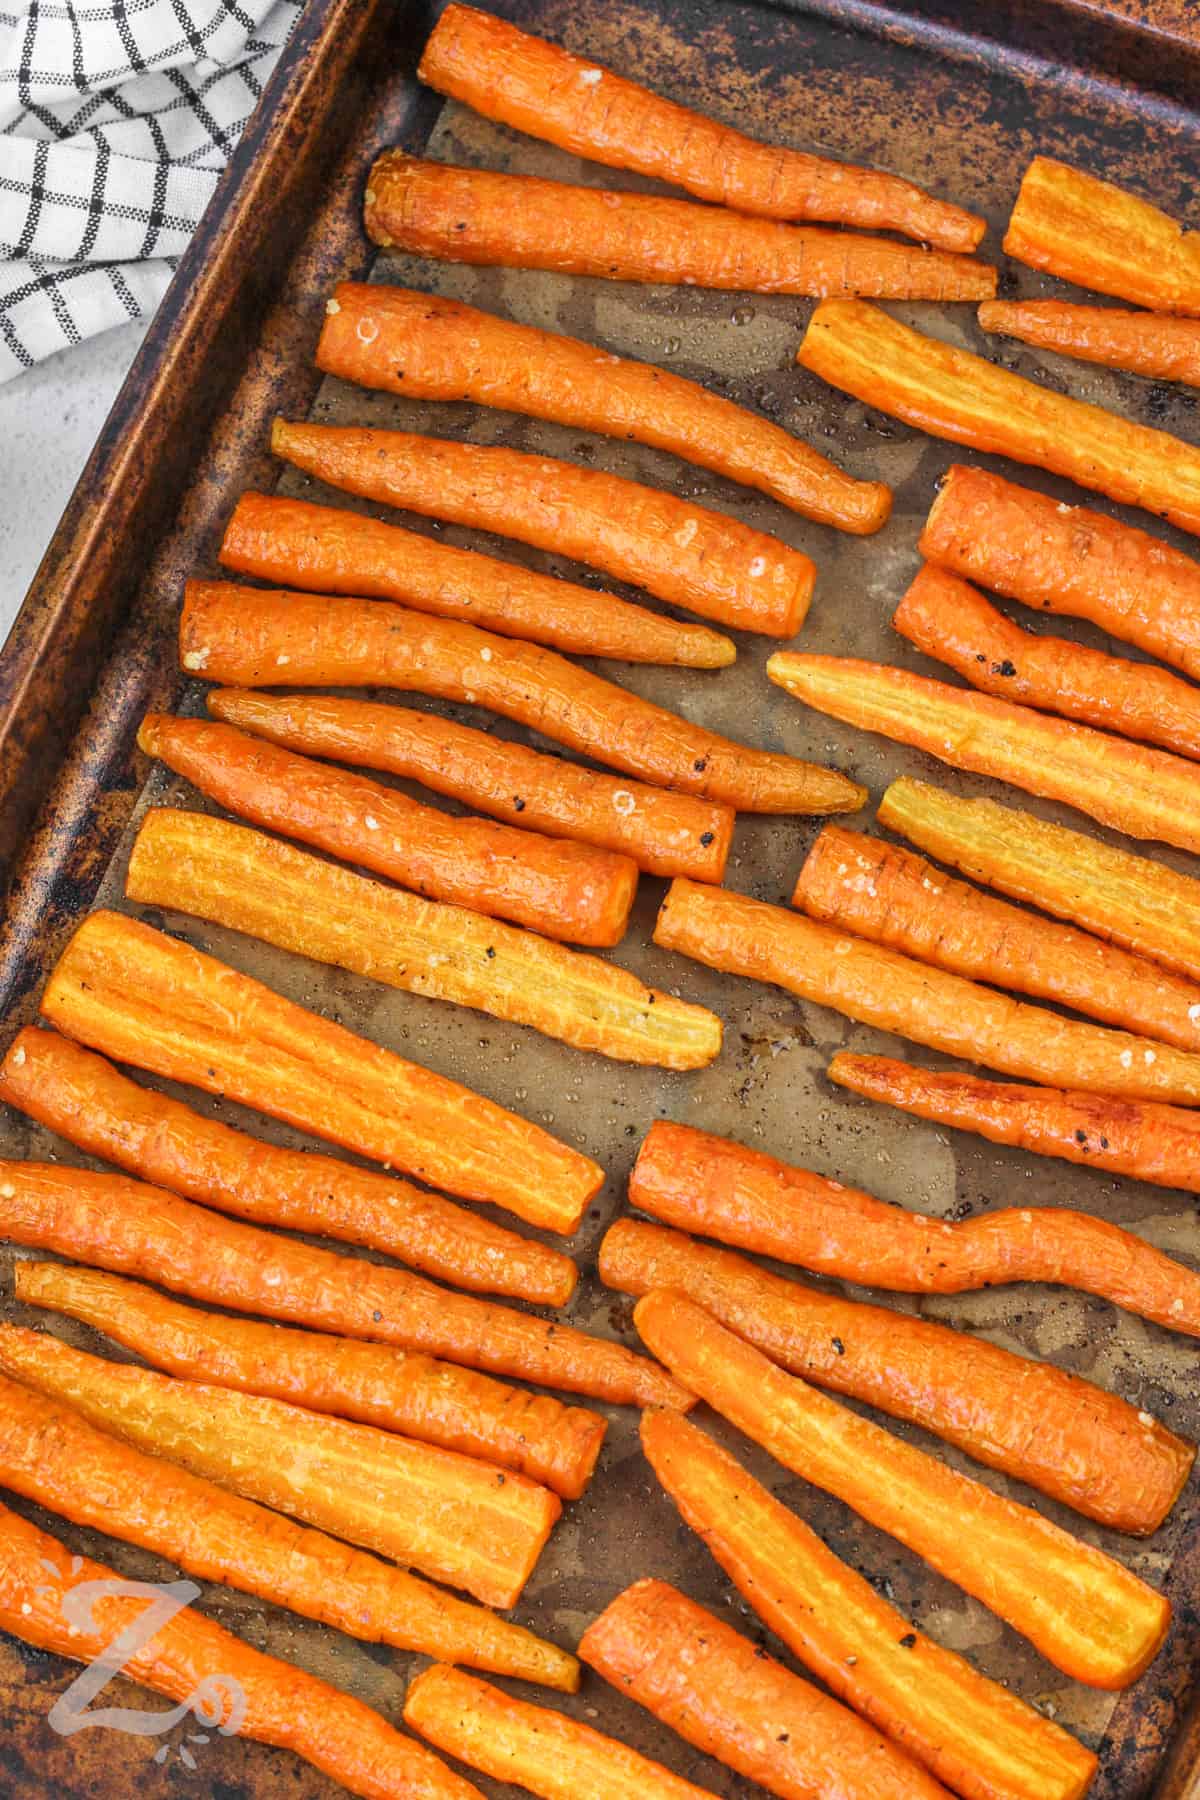 Oven Roasted Carrots on a baking sheet